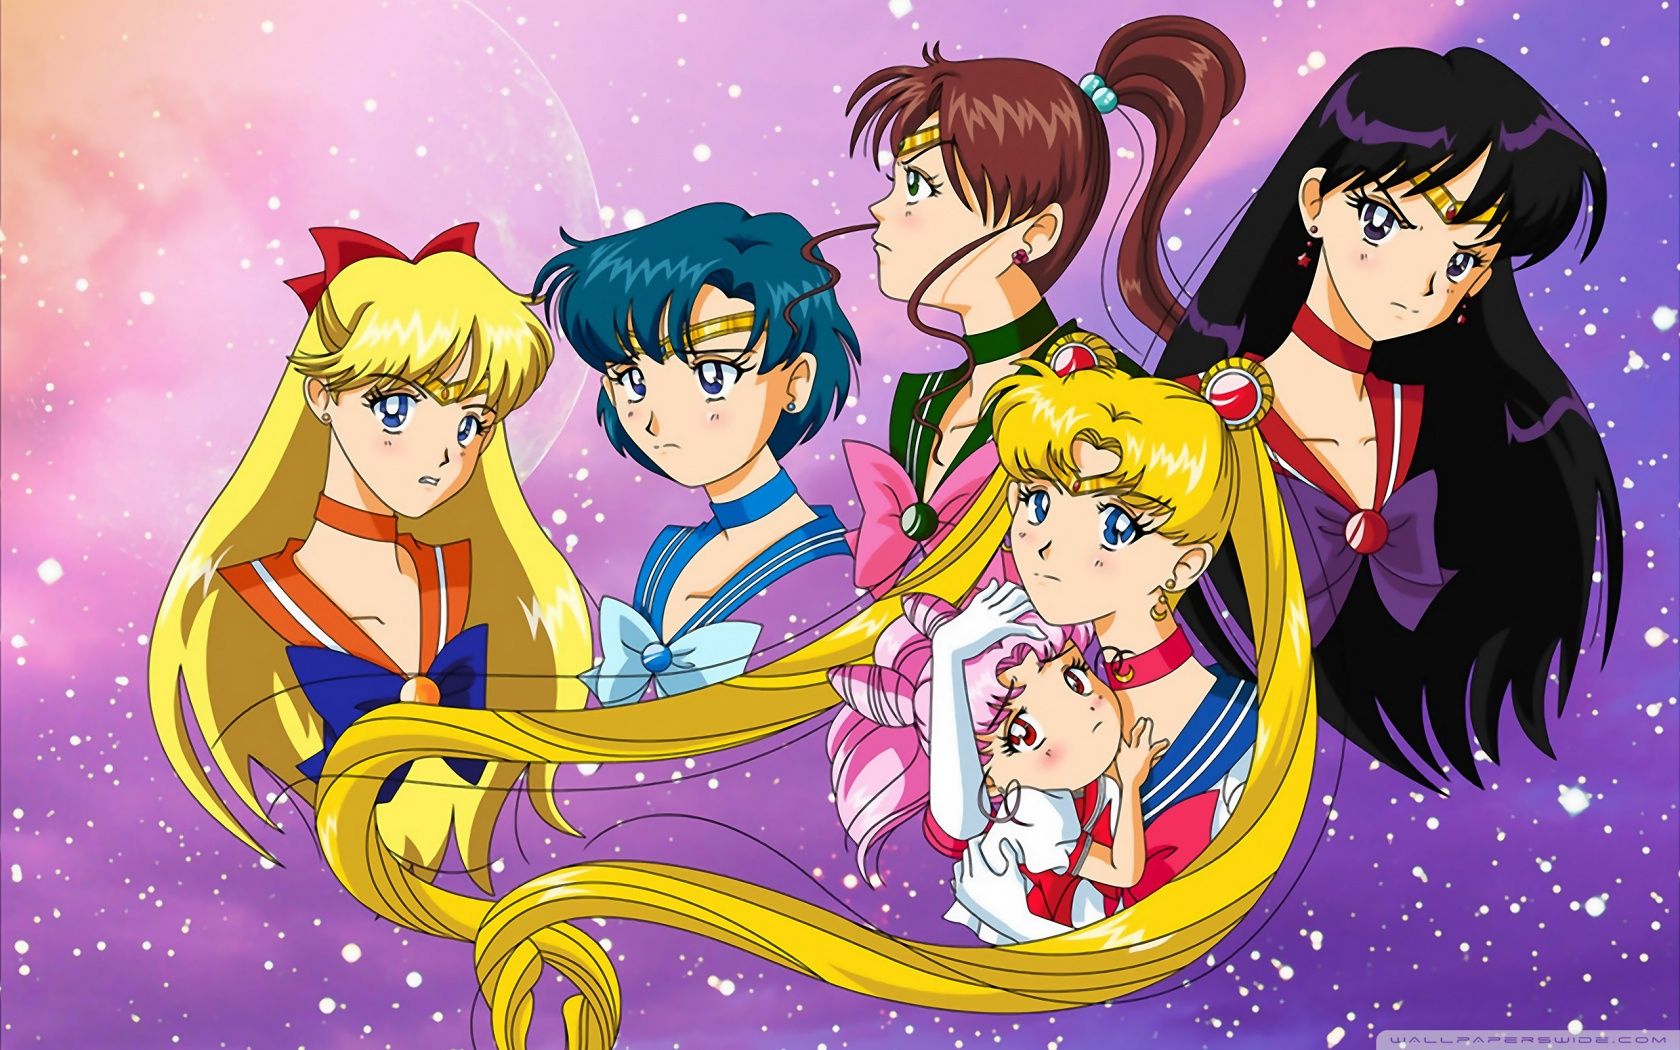 Sailor moon r is the third season of sailor moon tv series. It is also known as sailor moon r: super s in some regions. - Sailor Moon